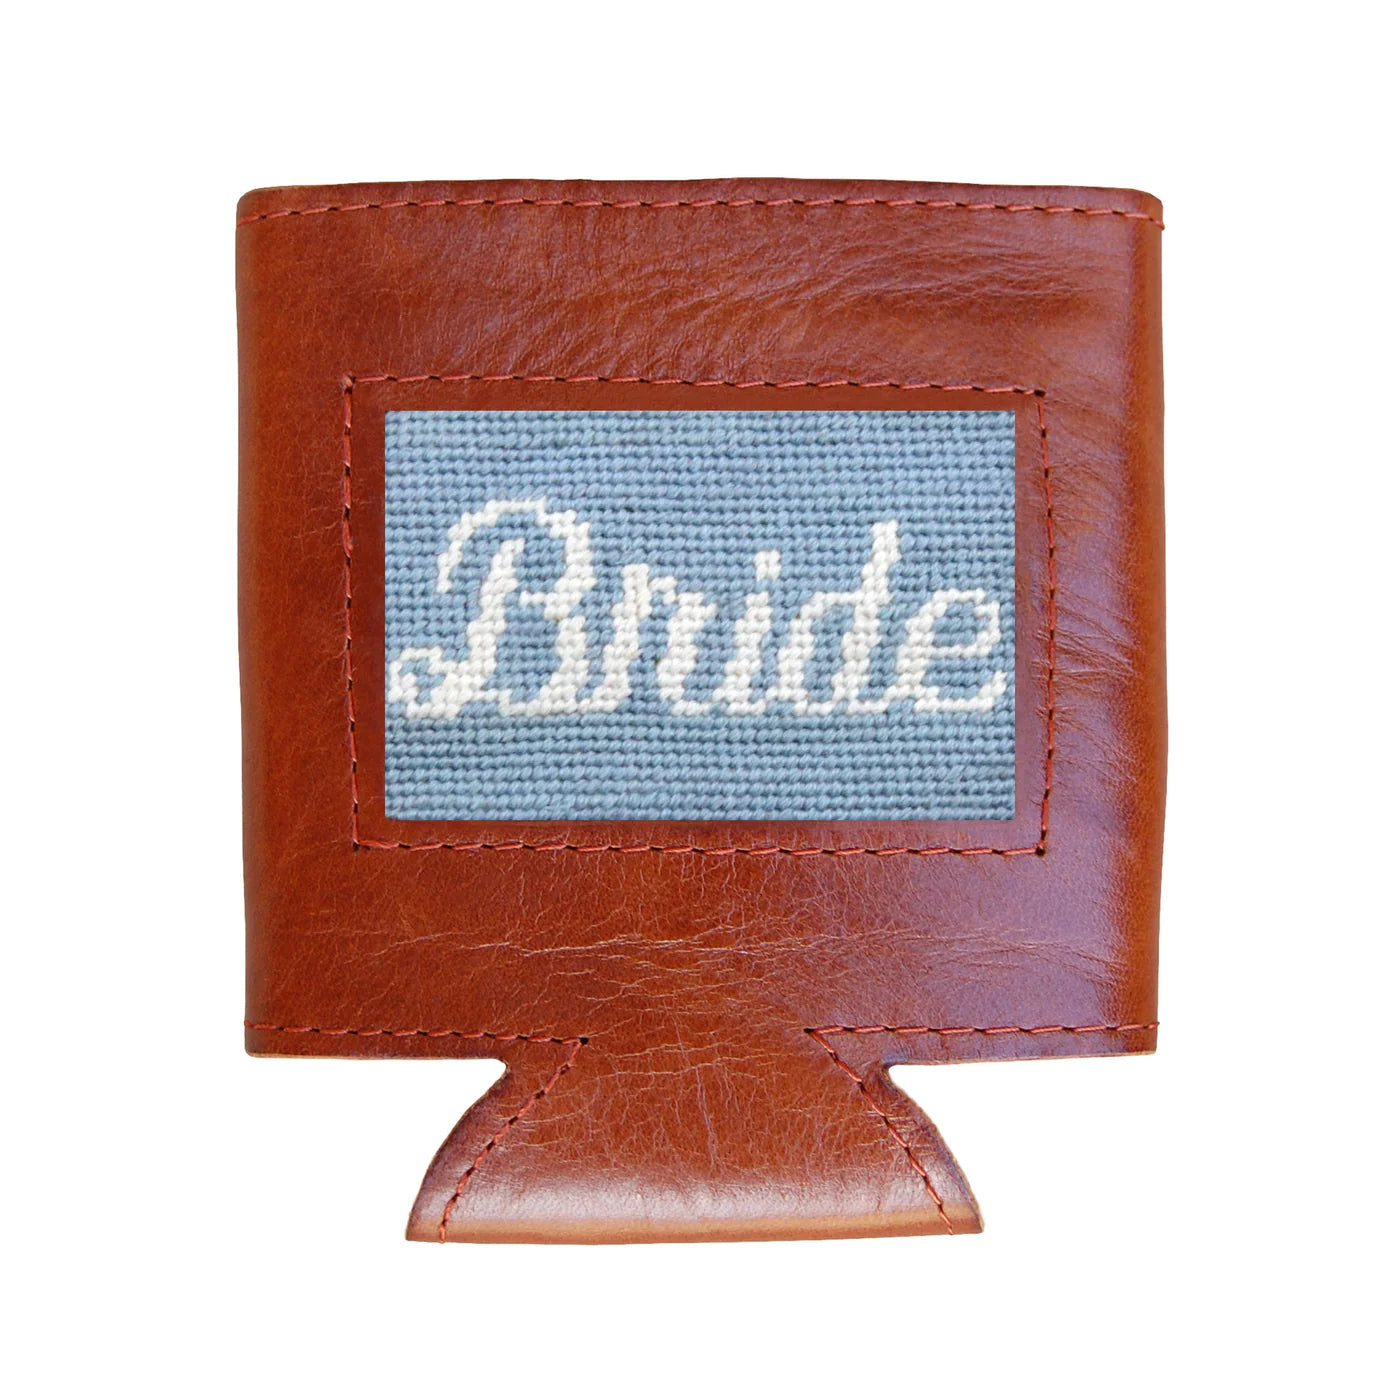 NEEDLEPOINT CAN COOLER, BRIDE